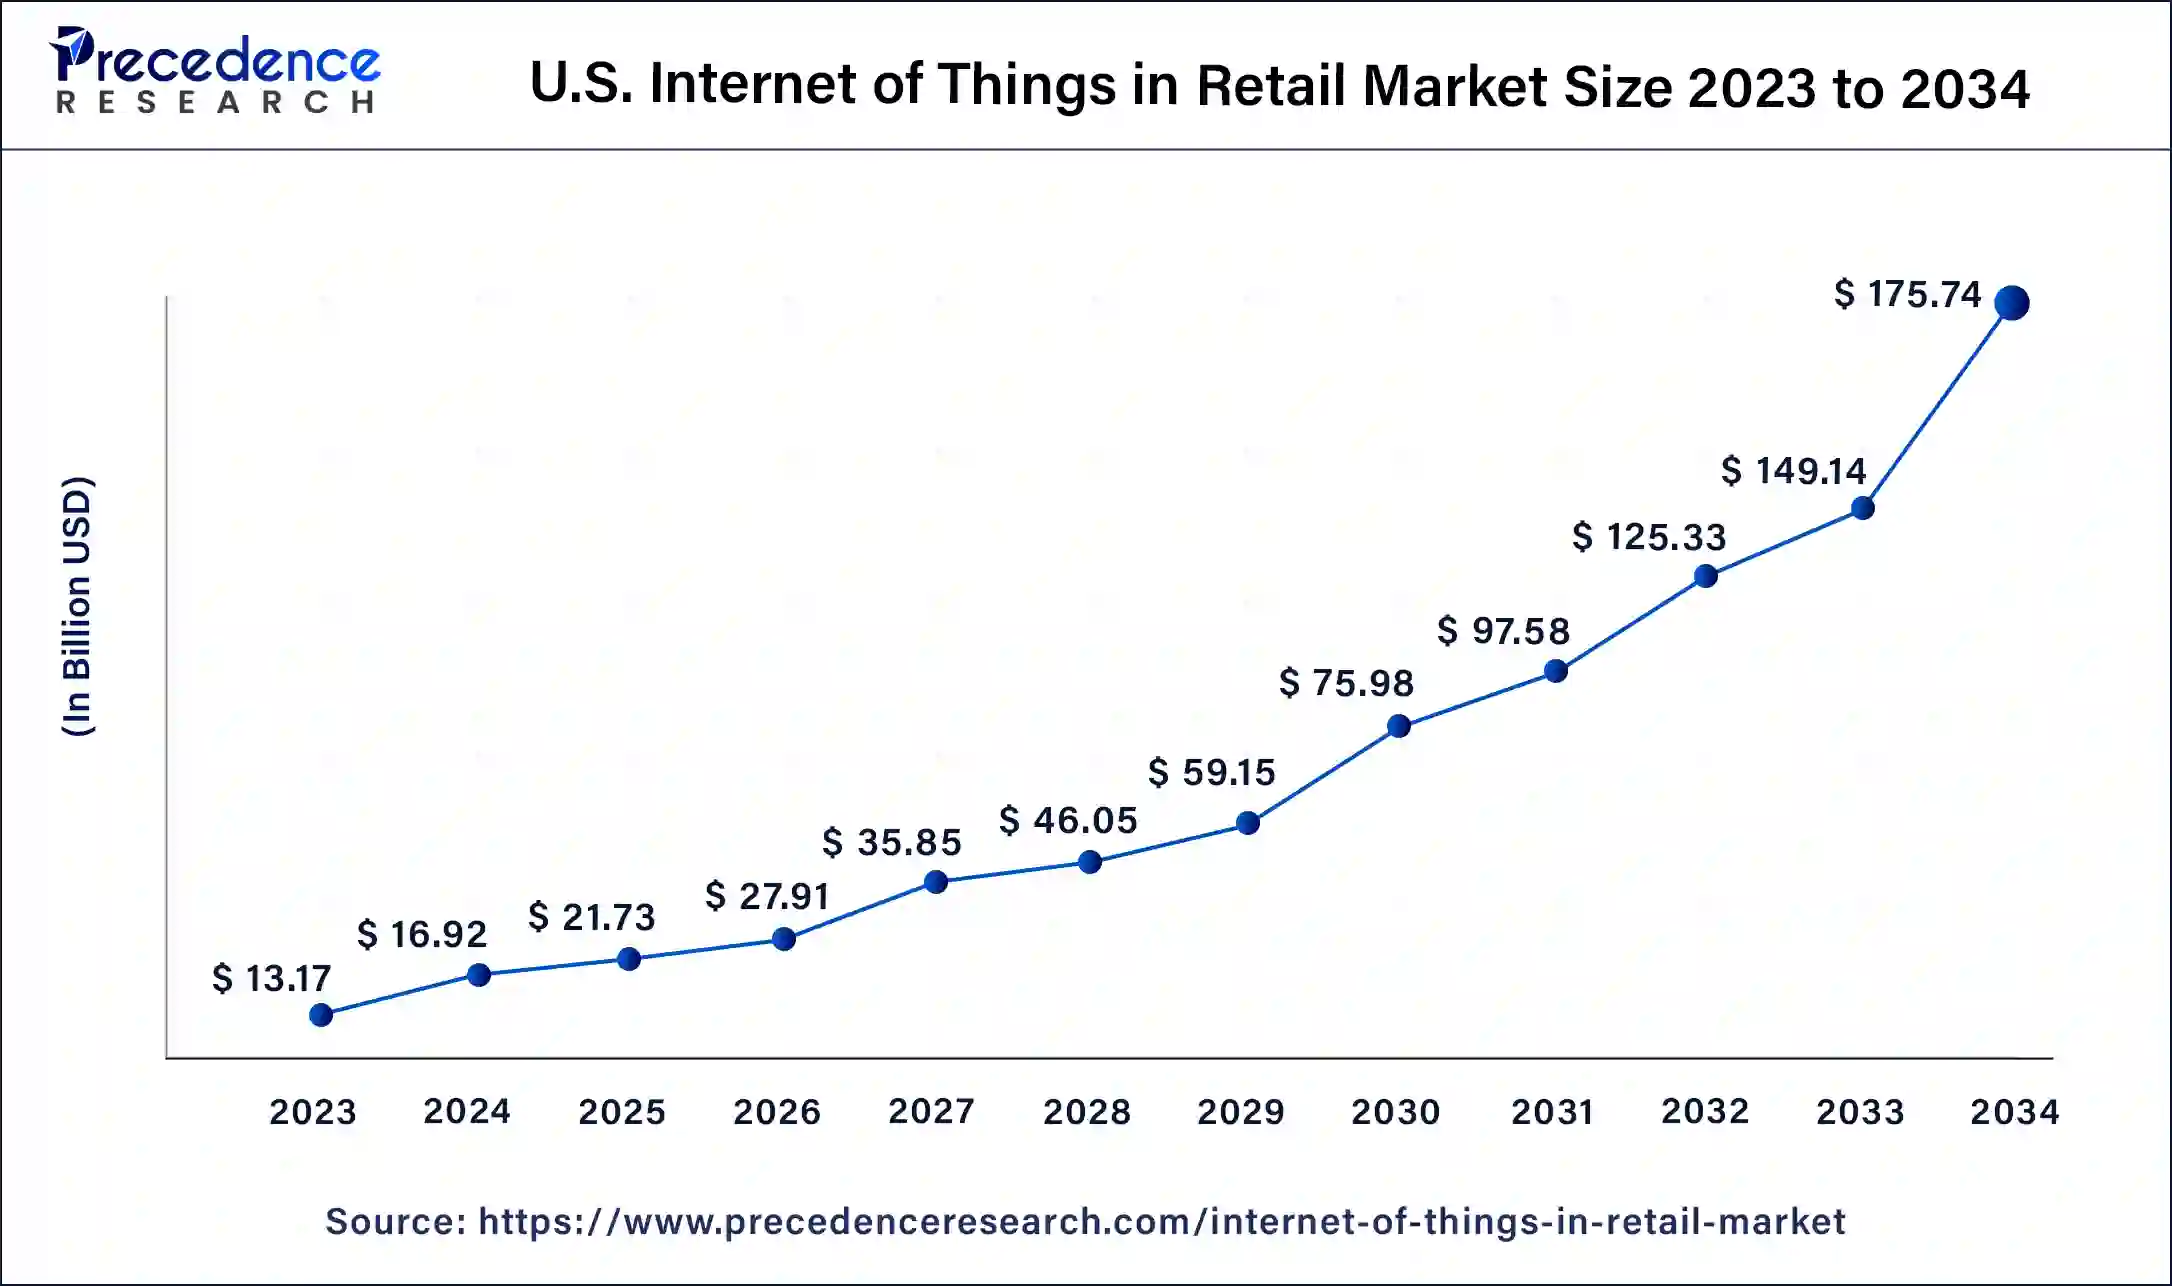 U.S. Internet of Things in Retail Market Size 2024 To 2034